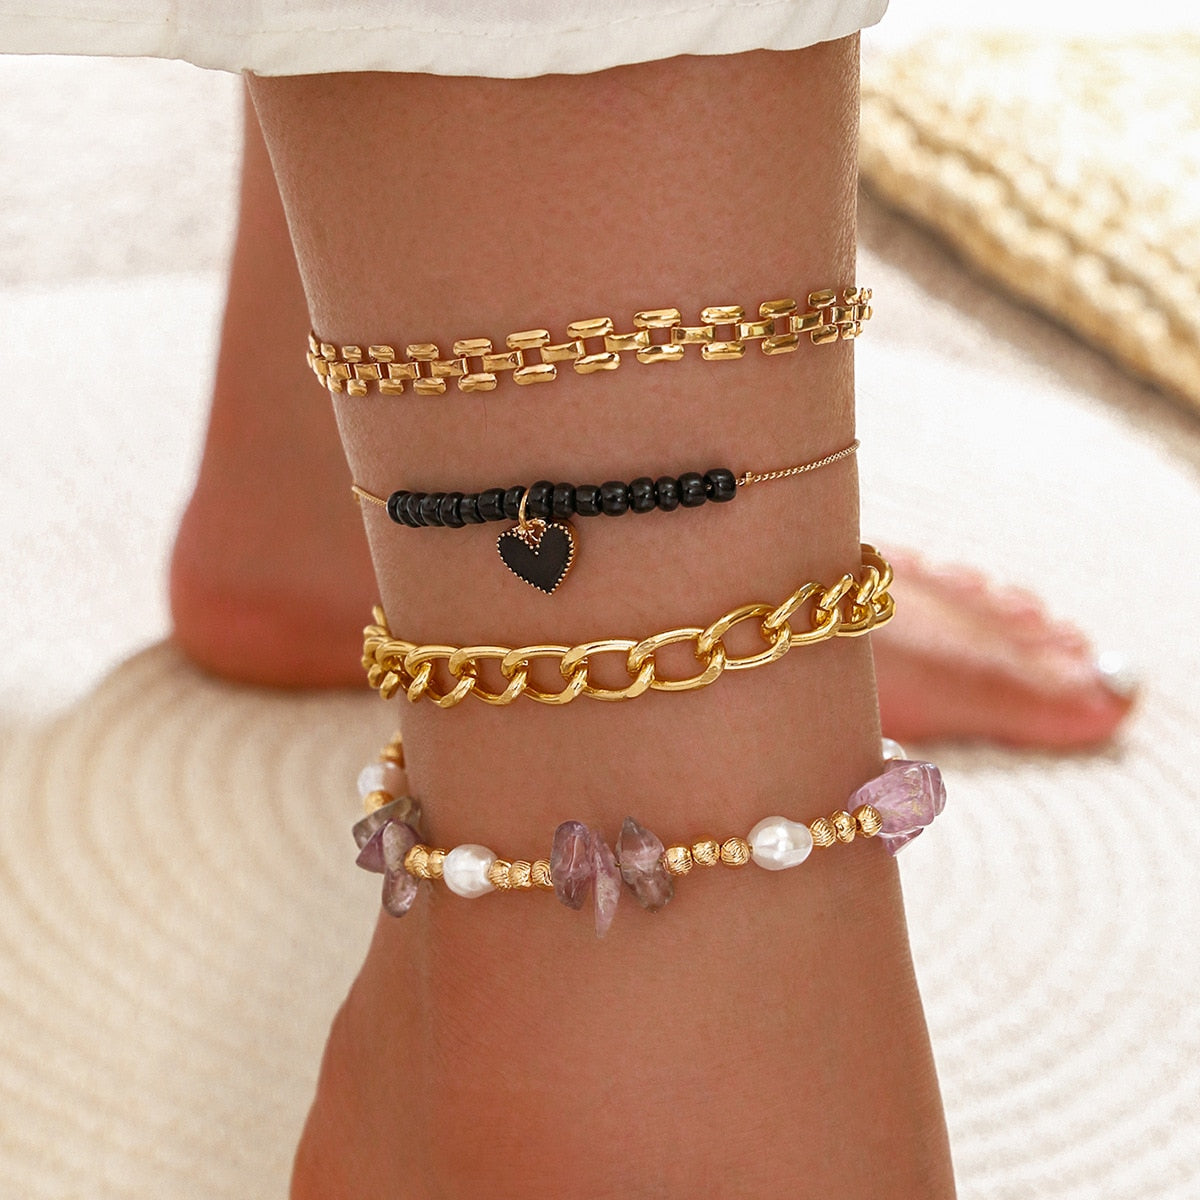 Bohemia Shell Star Chain Ankle Bracelet On Leg Foot Jewelry Boho Starfish key butterfly Charm Anklet Set For Women Accessories